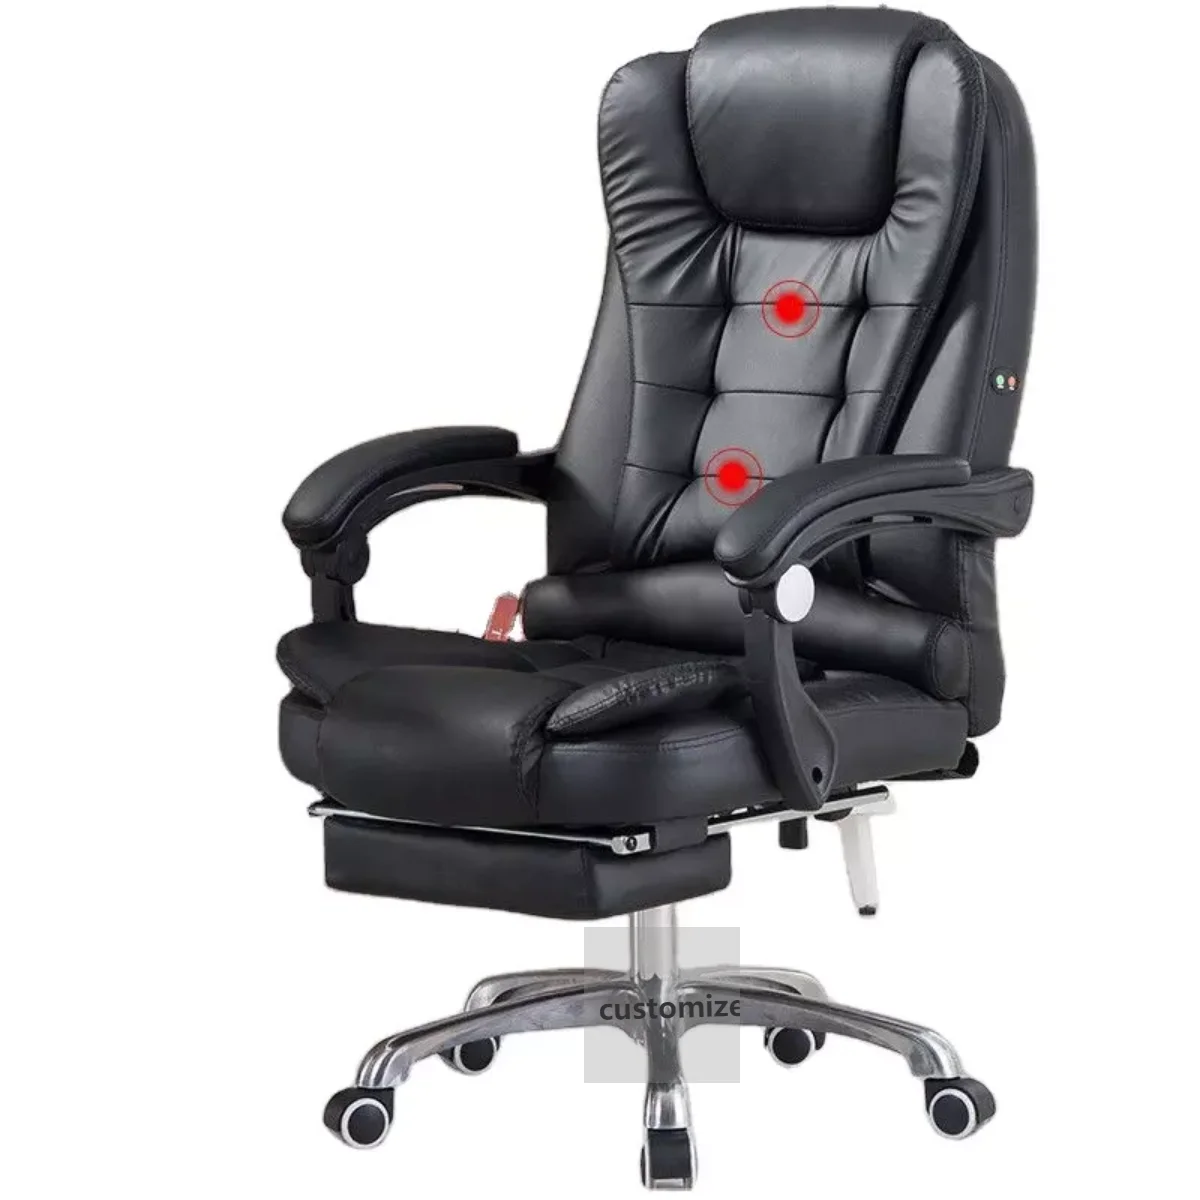 2020 Cheap Low Price Leather Luxury Executive Ergonomic Recliner Massage Wheels Swivel Office Furniture Desk Chair From China Buy 2021 Luxury Genuine Leather Boss Ceo Boos Manager Swivel Arm Chairs Silla